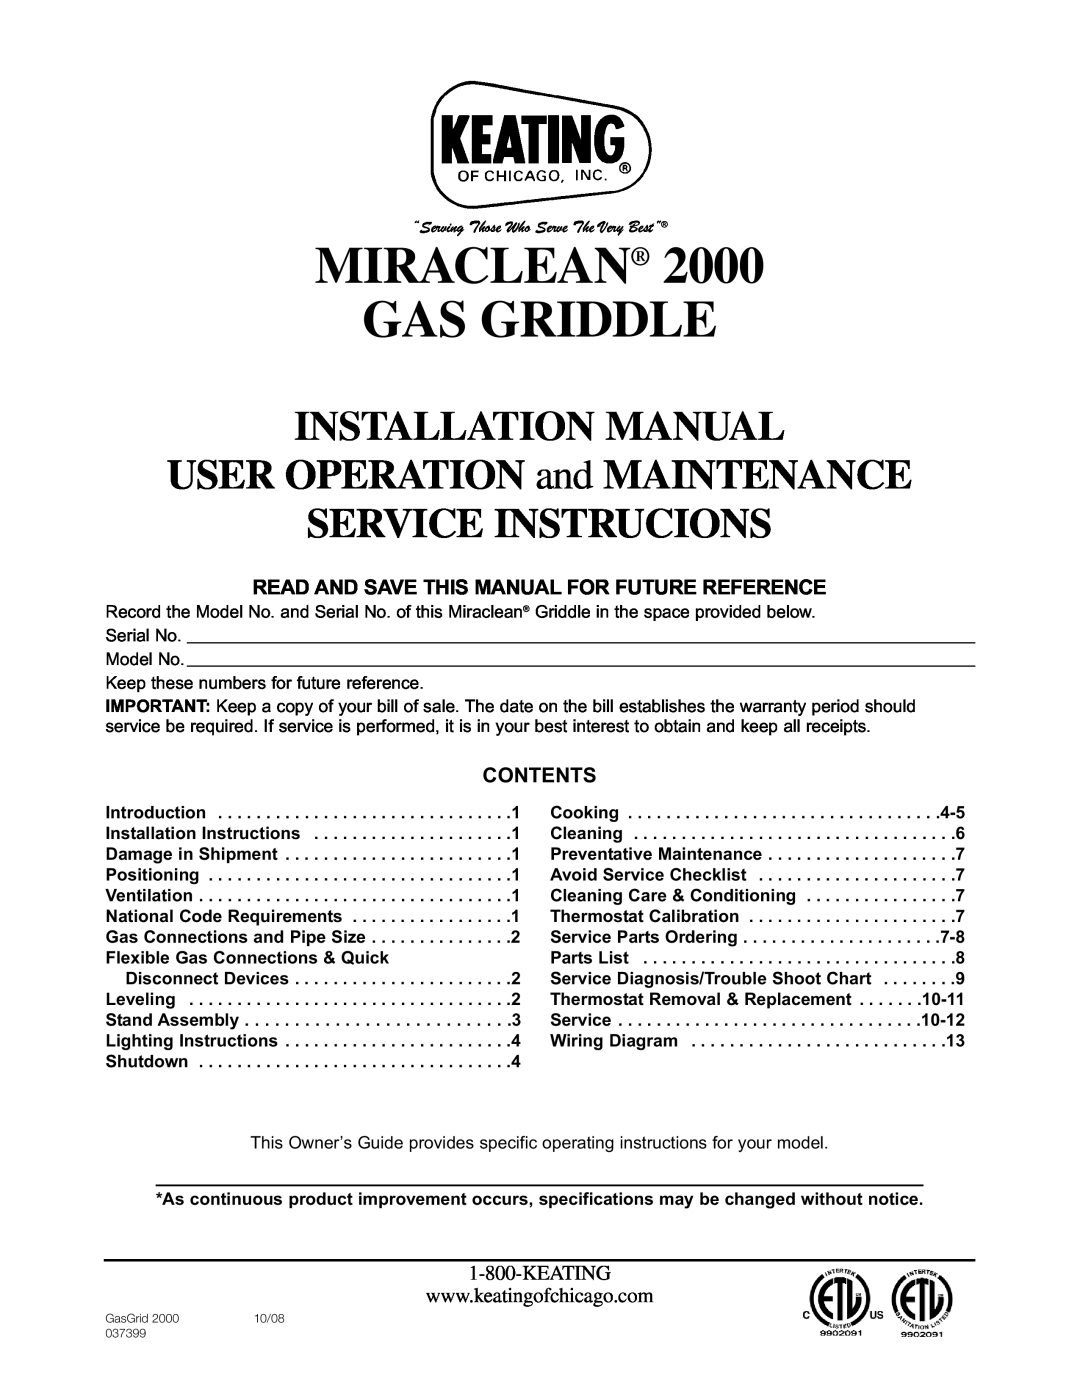 Keating Of Chicago installation manual Keating, Miraclean Gas Griddle, Service Instrucions, 10-11, 10-12 